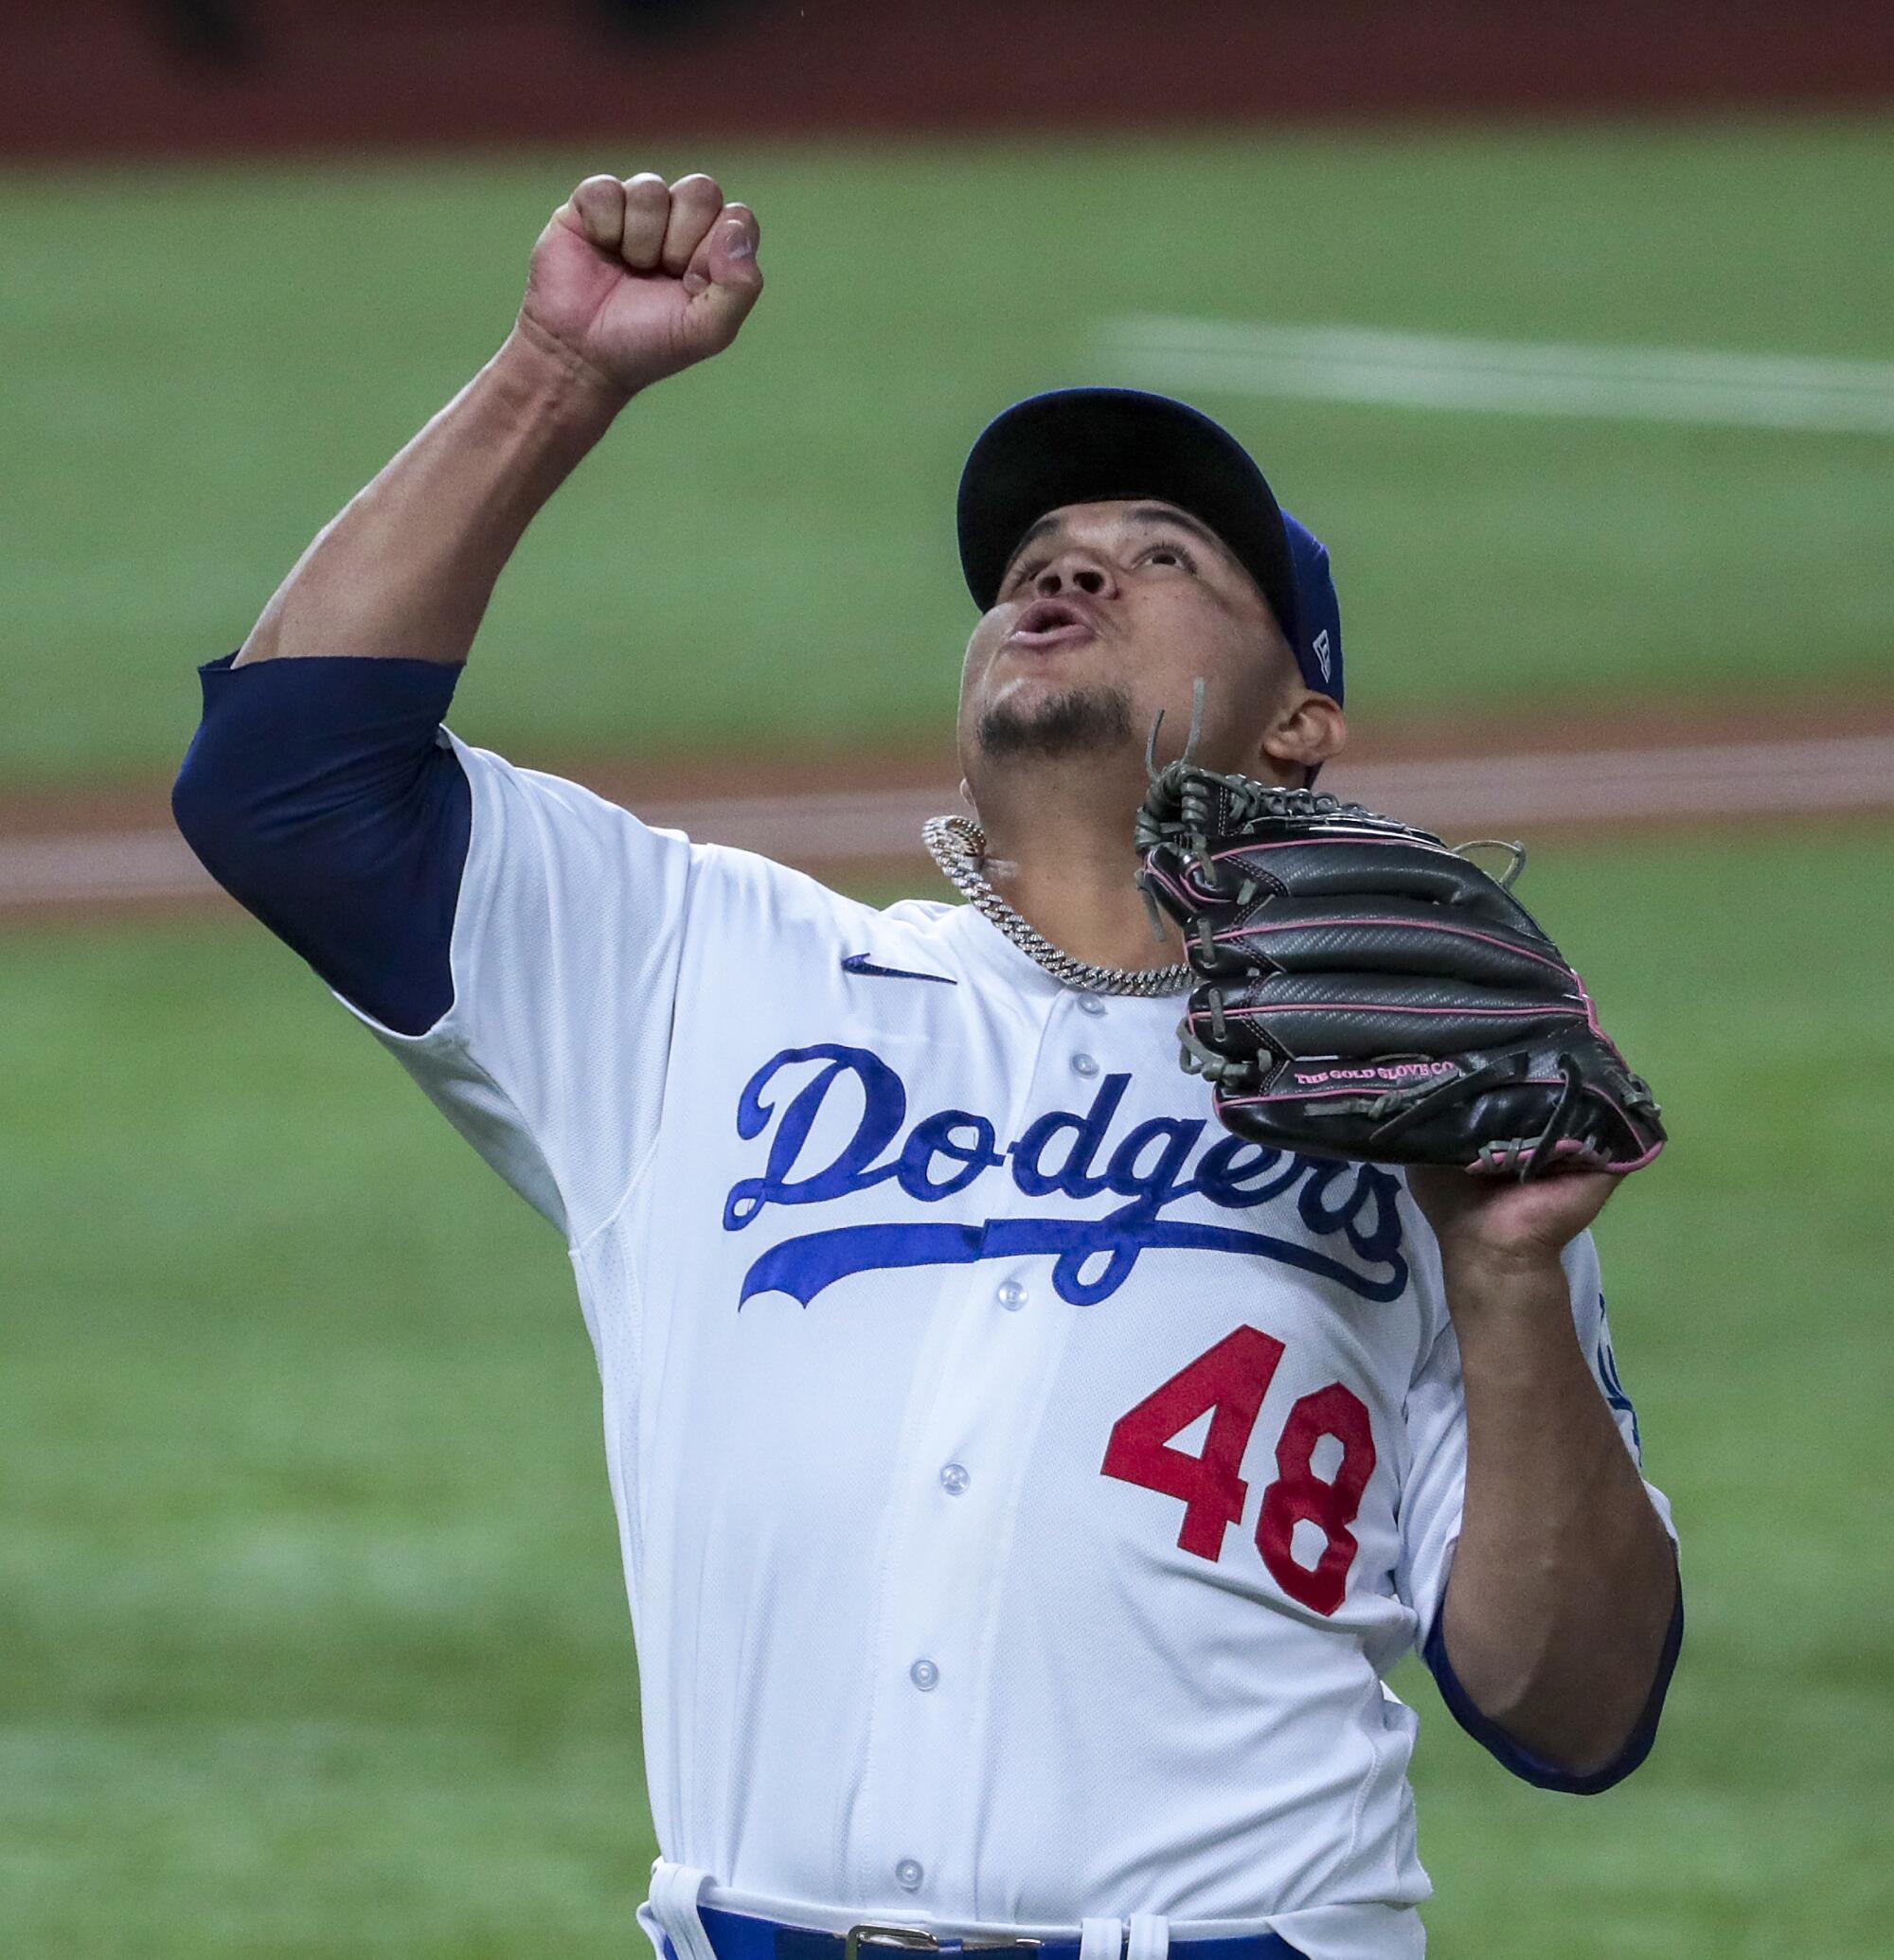 Dodgers reliever Brusdar Graterol celebrates after shutting out the Braves in the sixth inning of Game 1 of the NLCS.